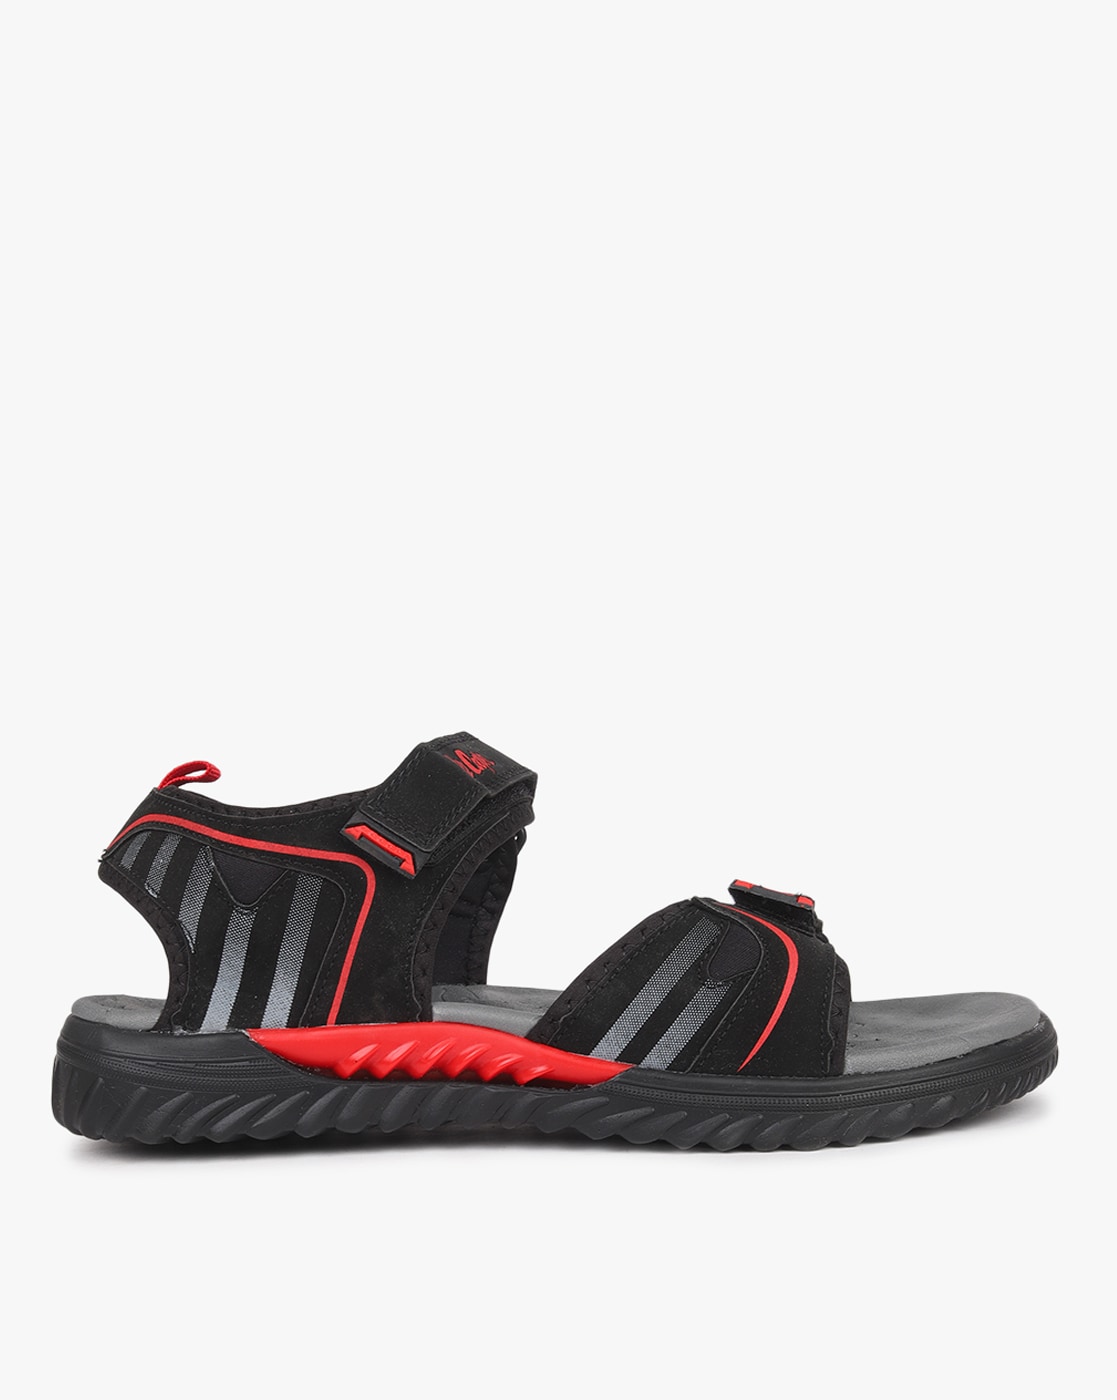 Buy Sandals For Men: Quick-2-Blk-Red | Campus Shoes